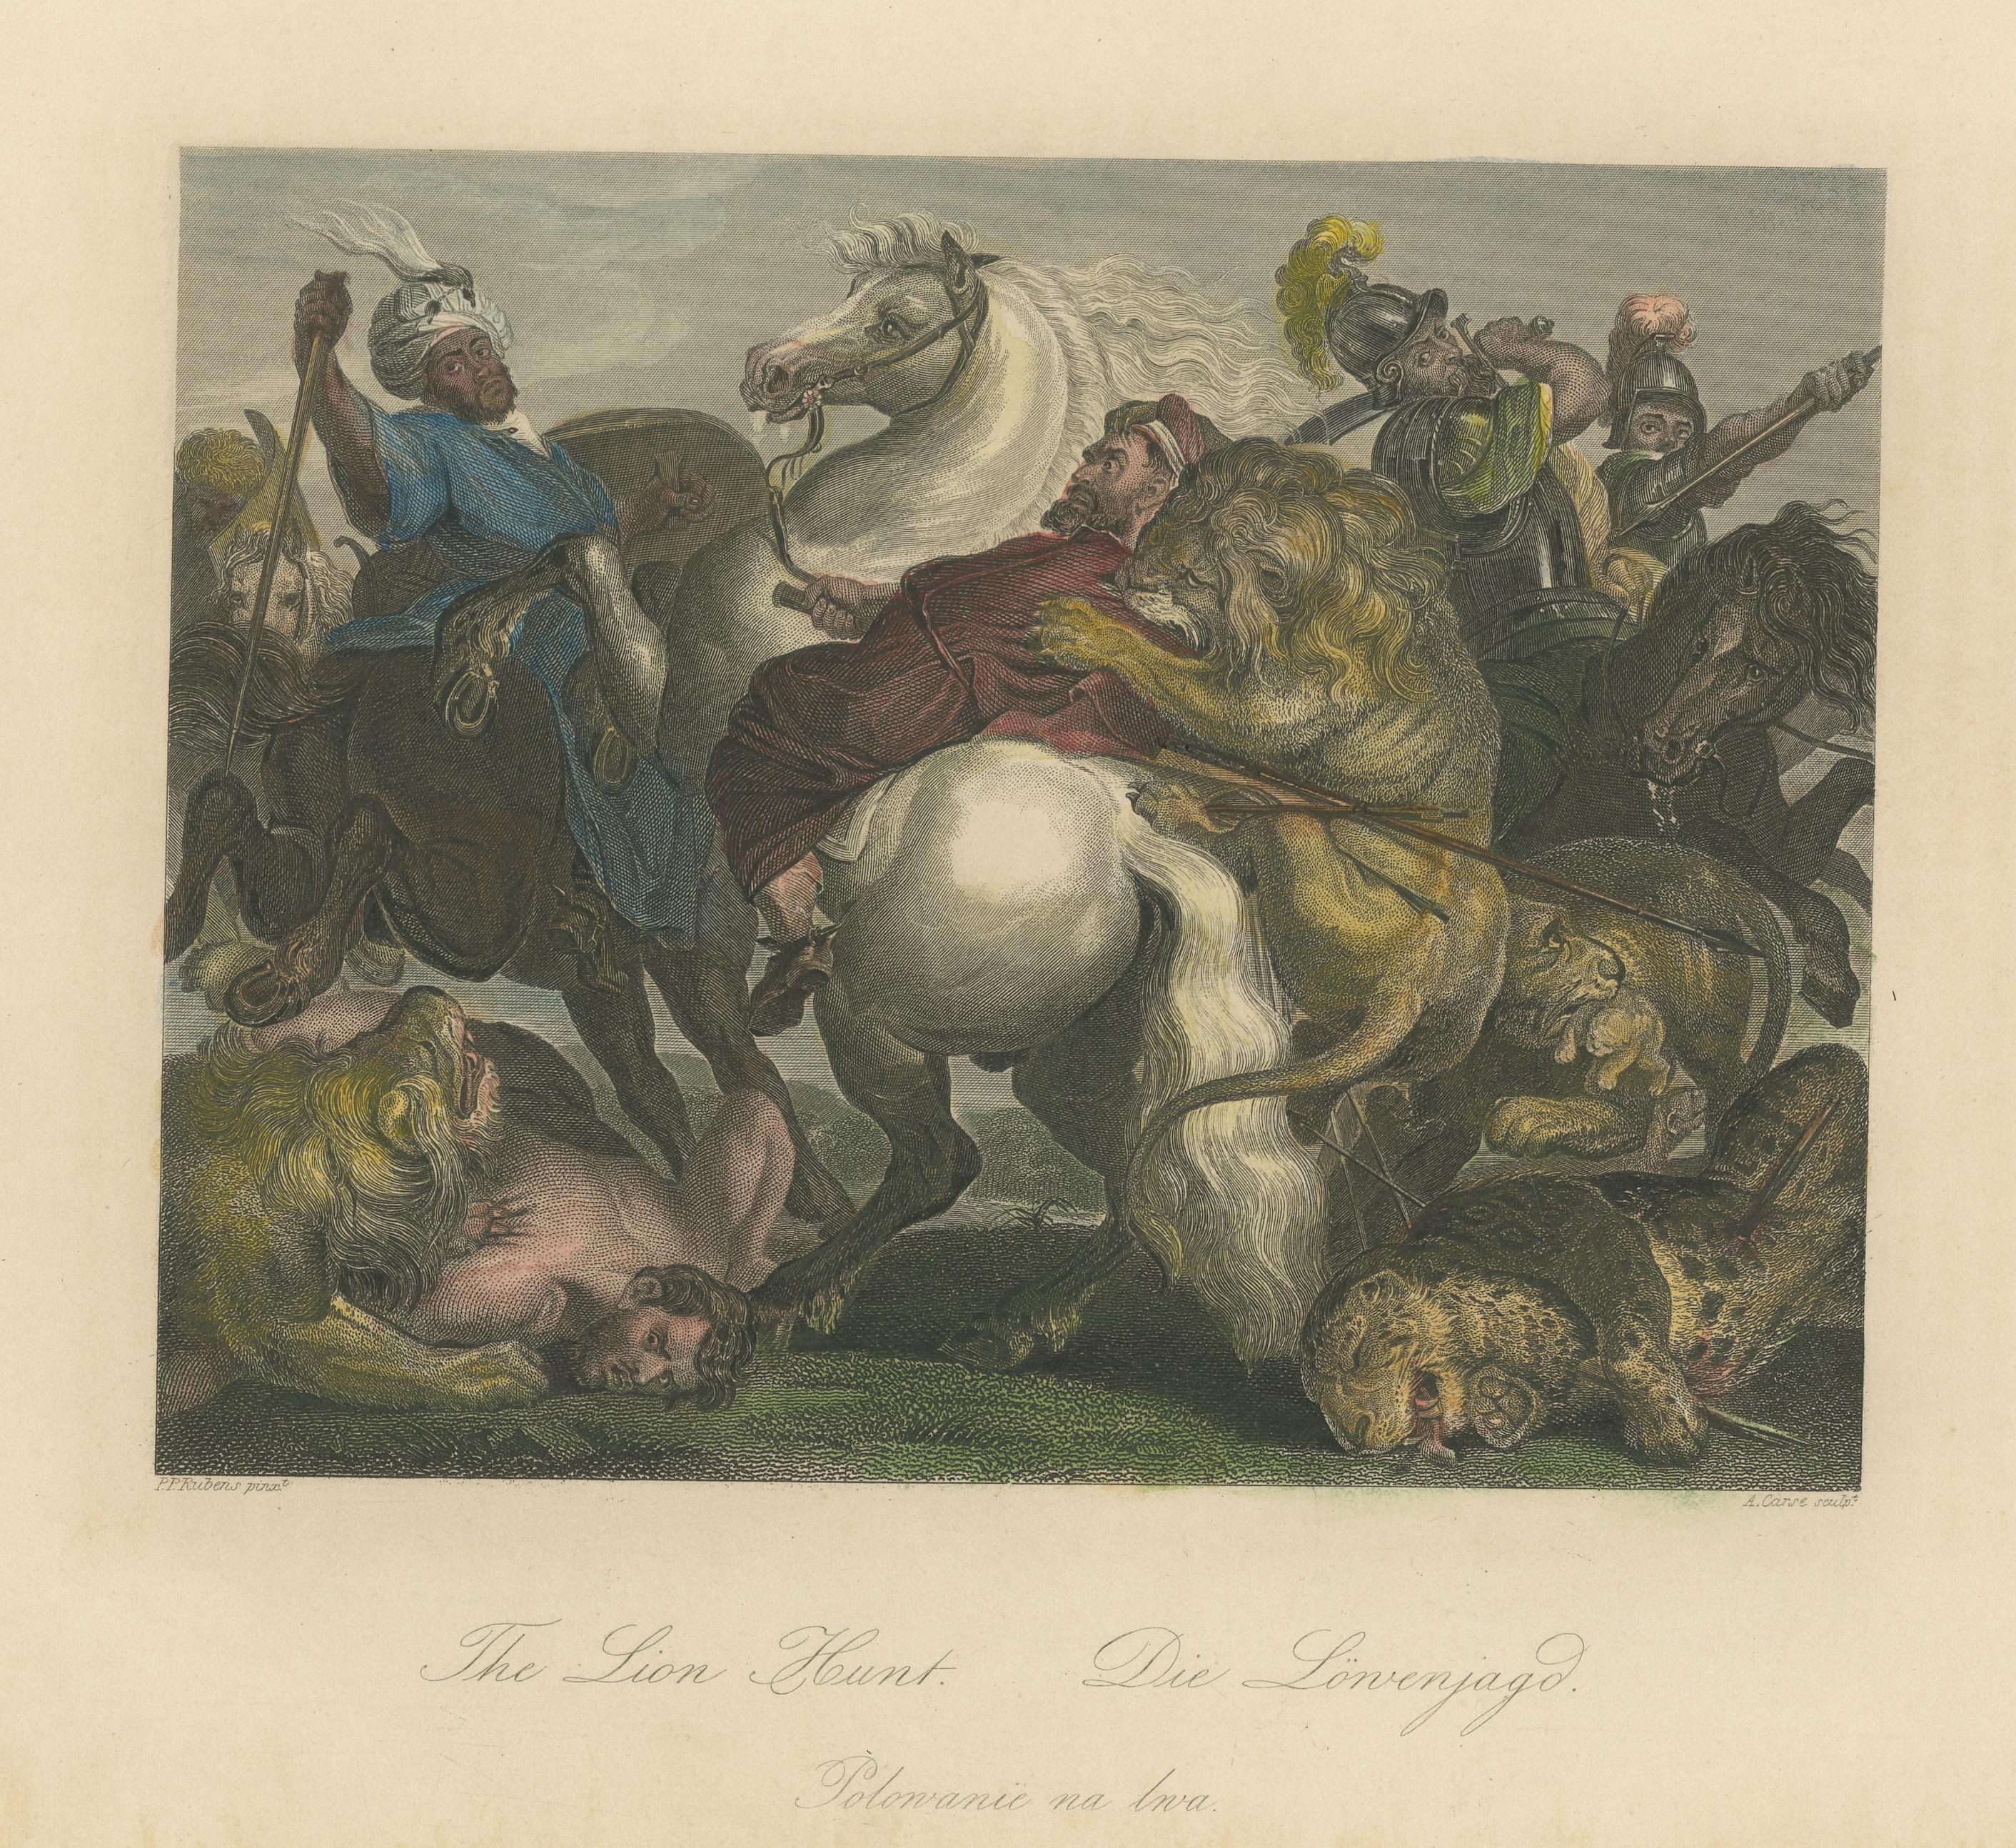 the lion hunt painting